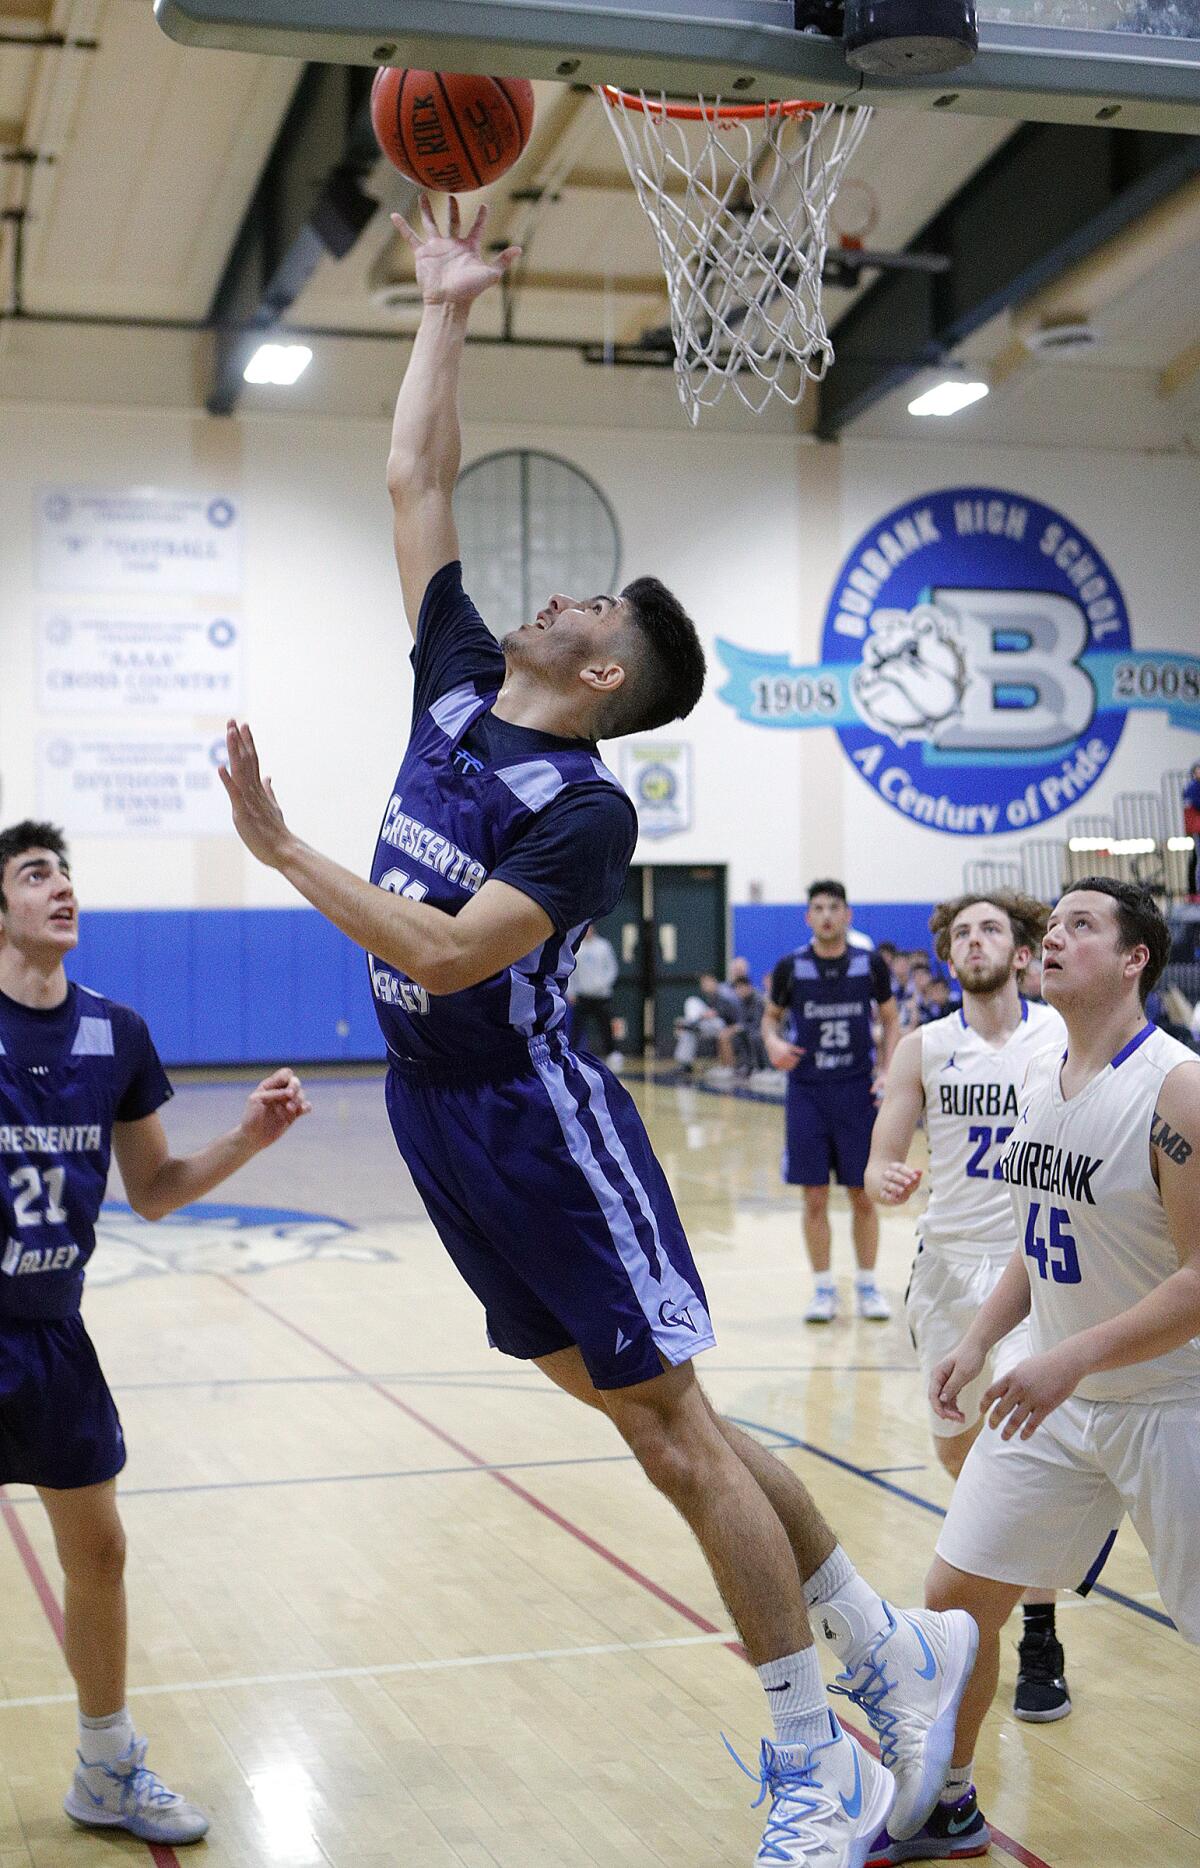 Crescenta Valley's Alec Voskanian does a reverse layup against Burbank in a Pacific League boys' basketball game at Burbank High School on Thursday, December 19, 2019.